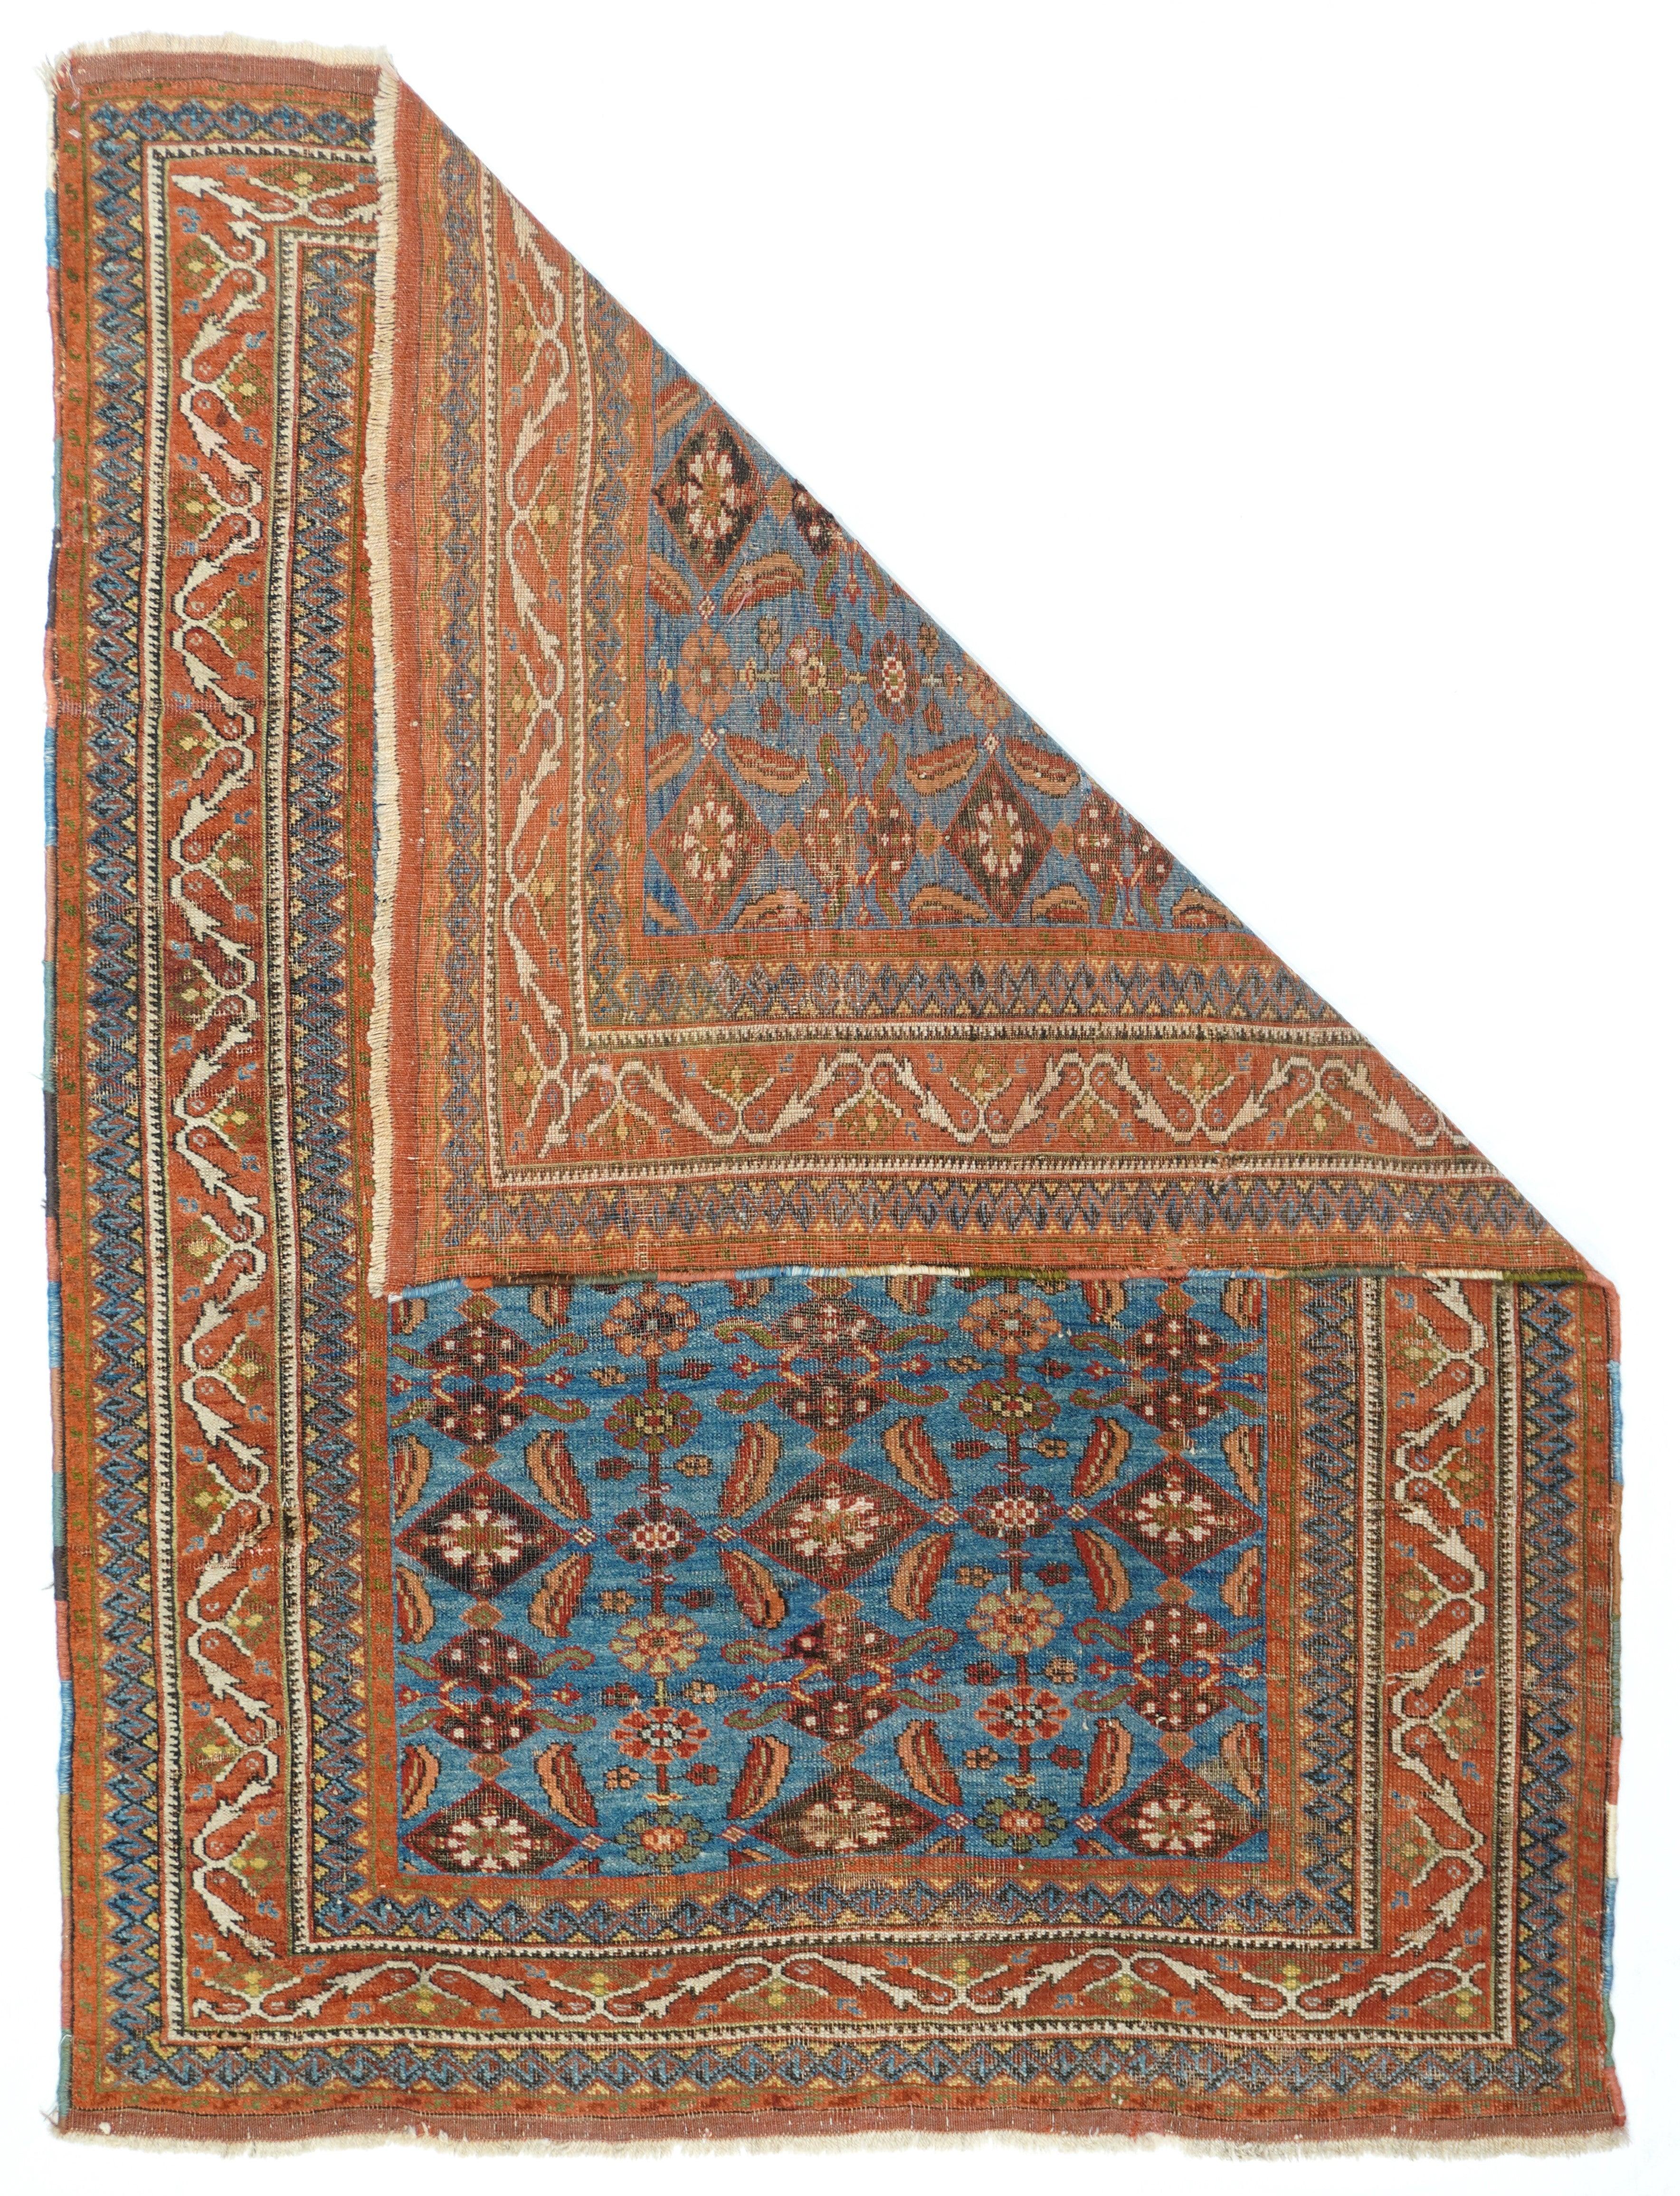 Antique Tribal Afshar rug, measures : 3'11'' x 5'3''. The cerulean blue field shows a well-balanced three by six array of rosettes-in-lozenges, attended by small serrated leaves and smaller rosettes. Red main border with interesting attenuated